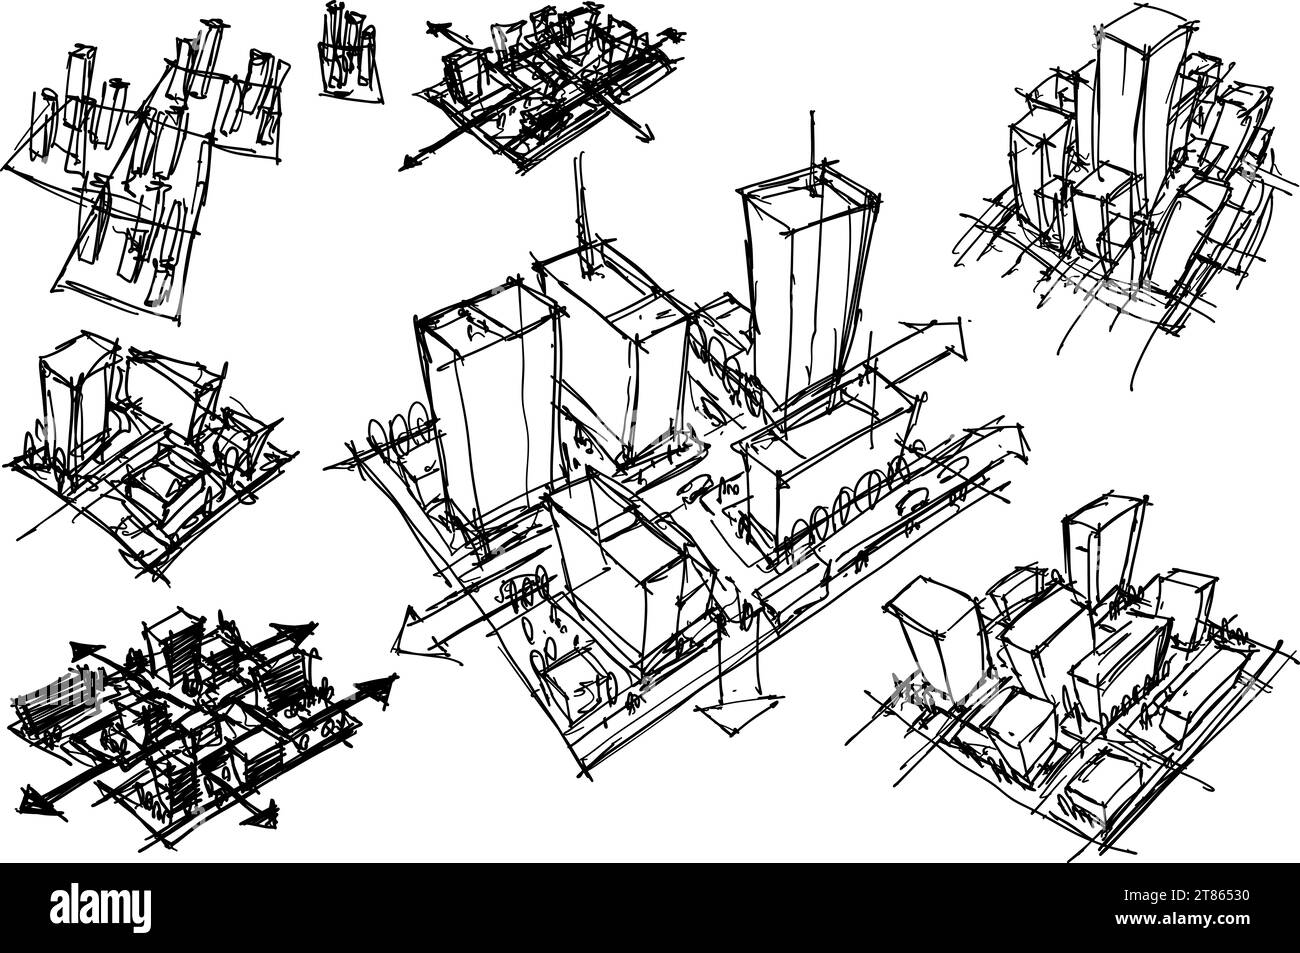 hand drawn architectural sketches of urban ideas and city structures and parts of the city Stock Photo